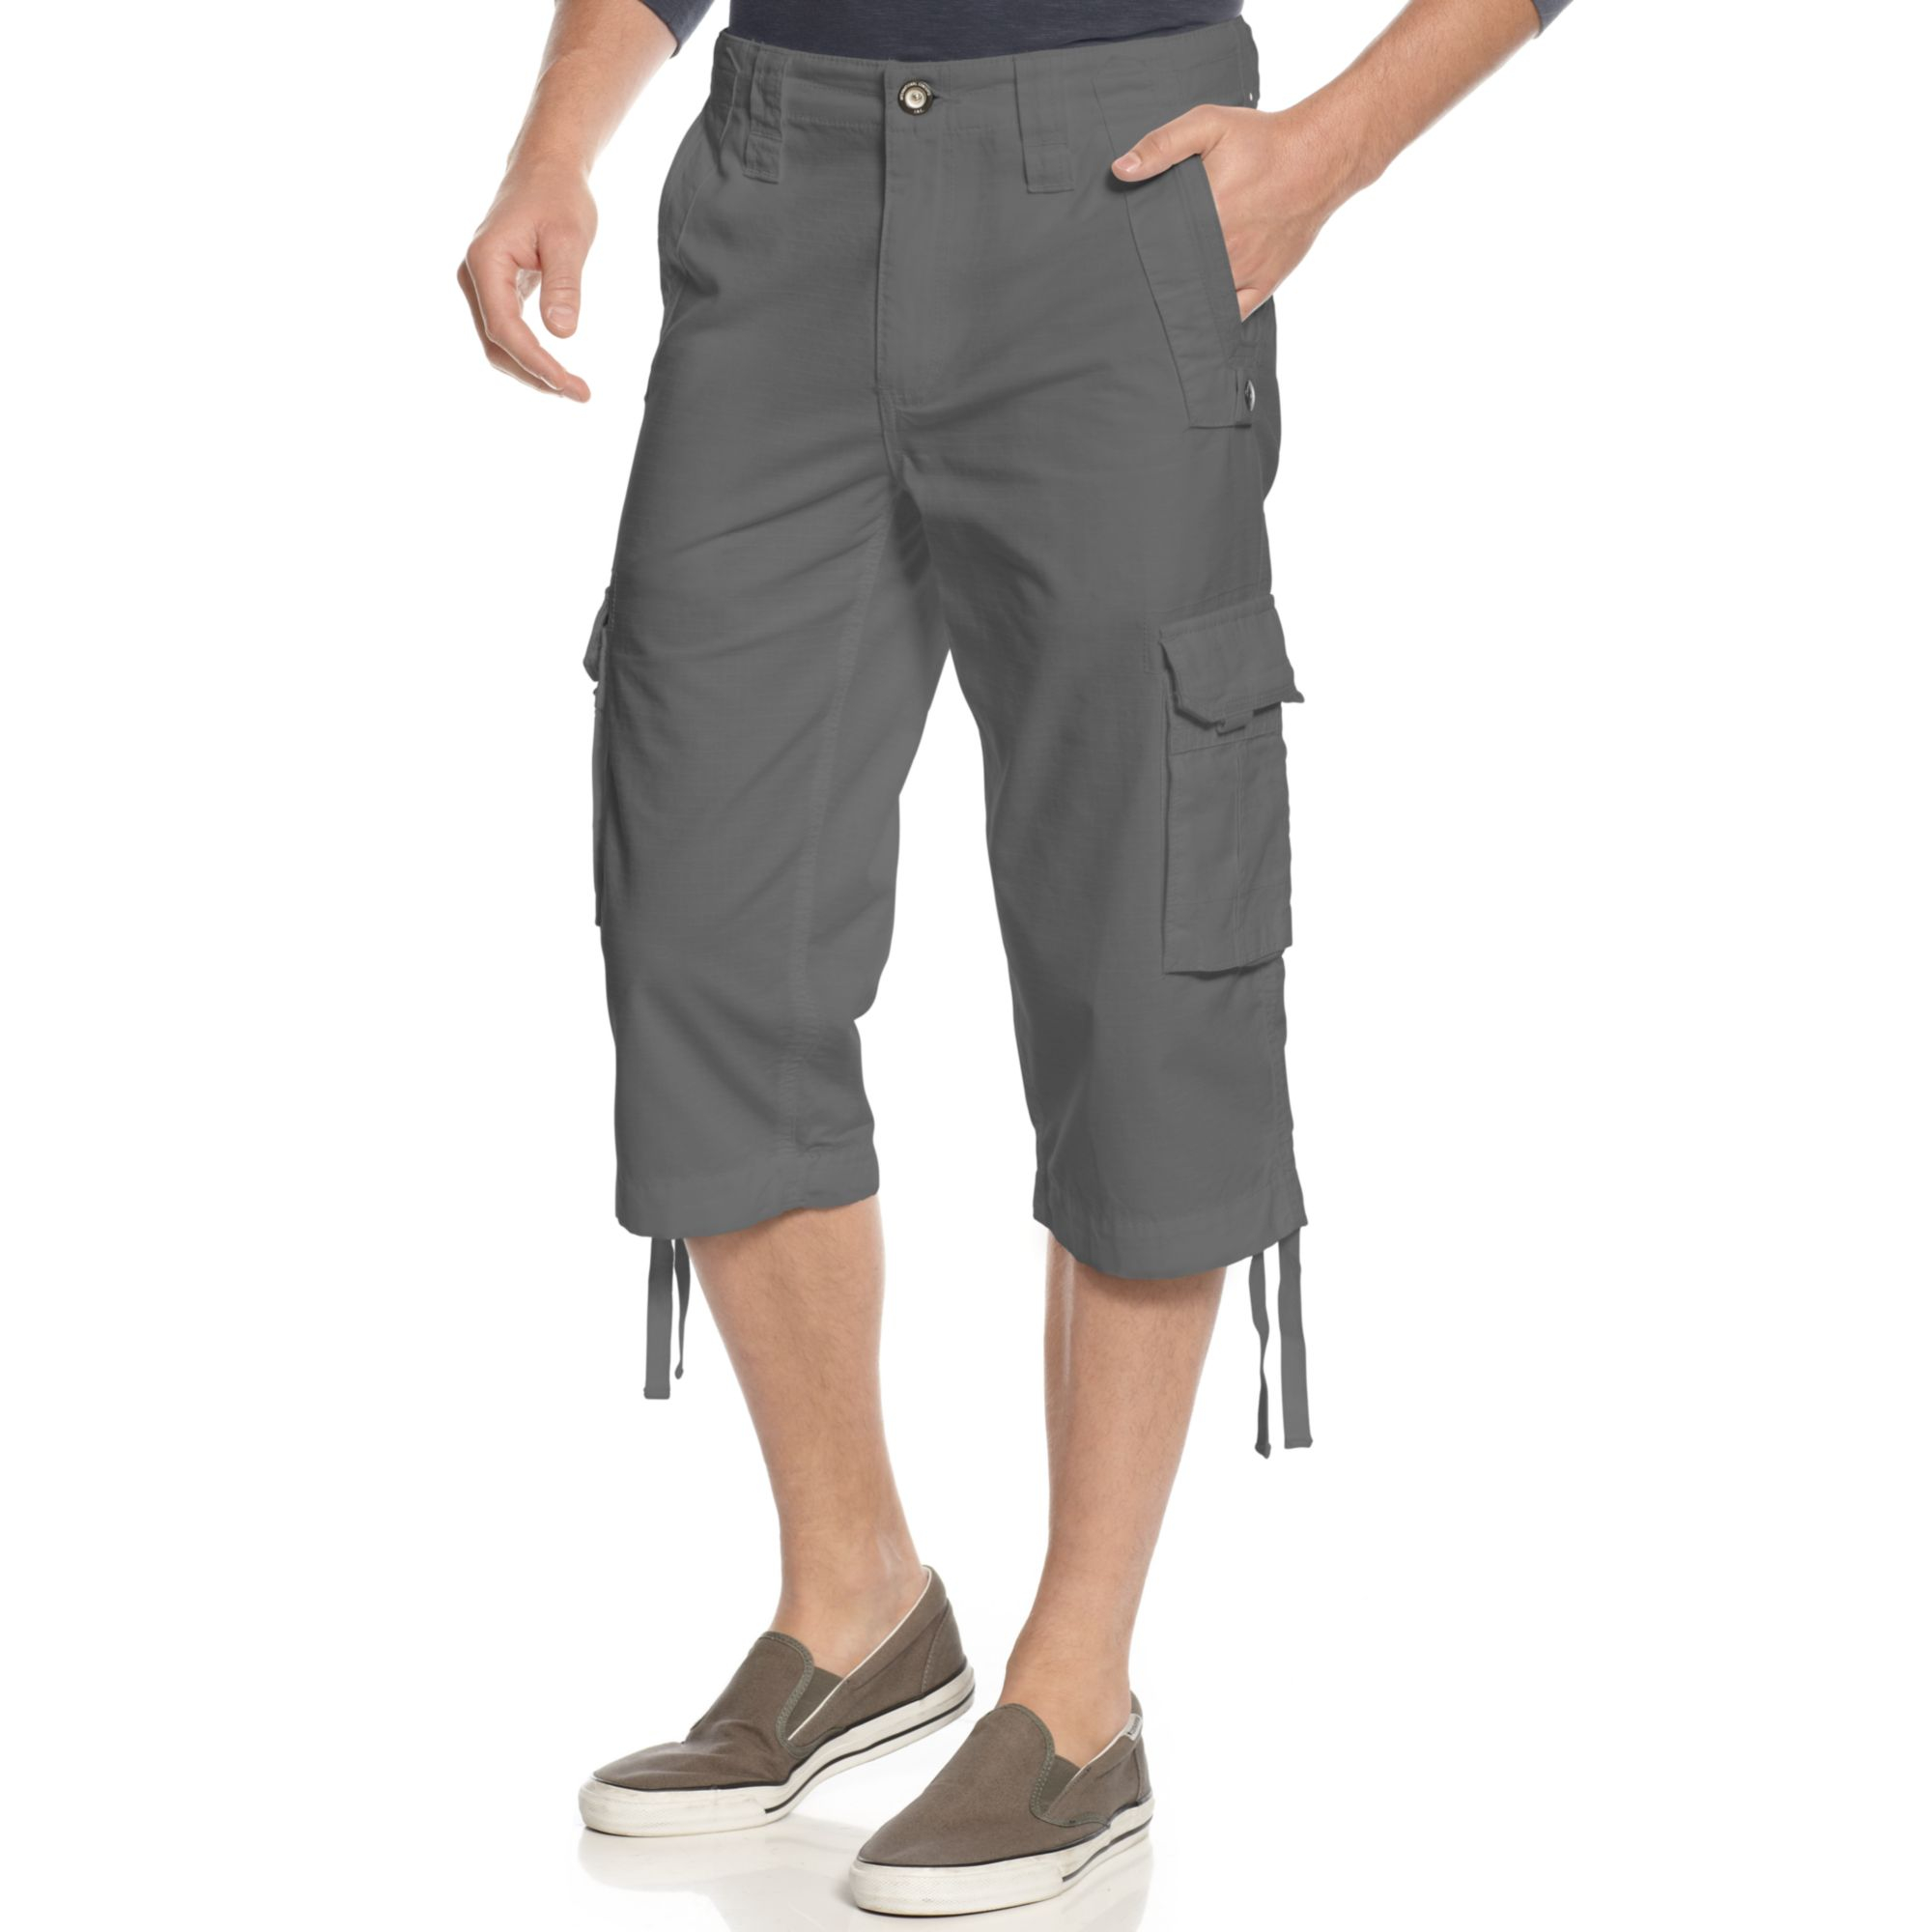 INC International Concepts Toro Ripstop Shorts in Gray for Men - Lyst